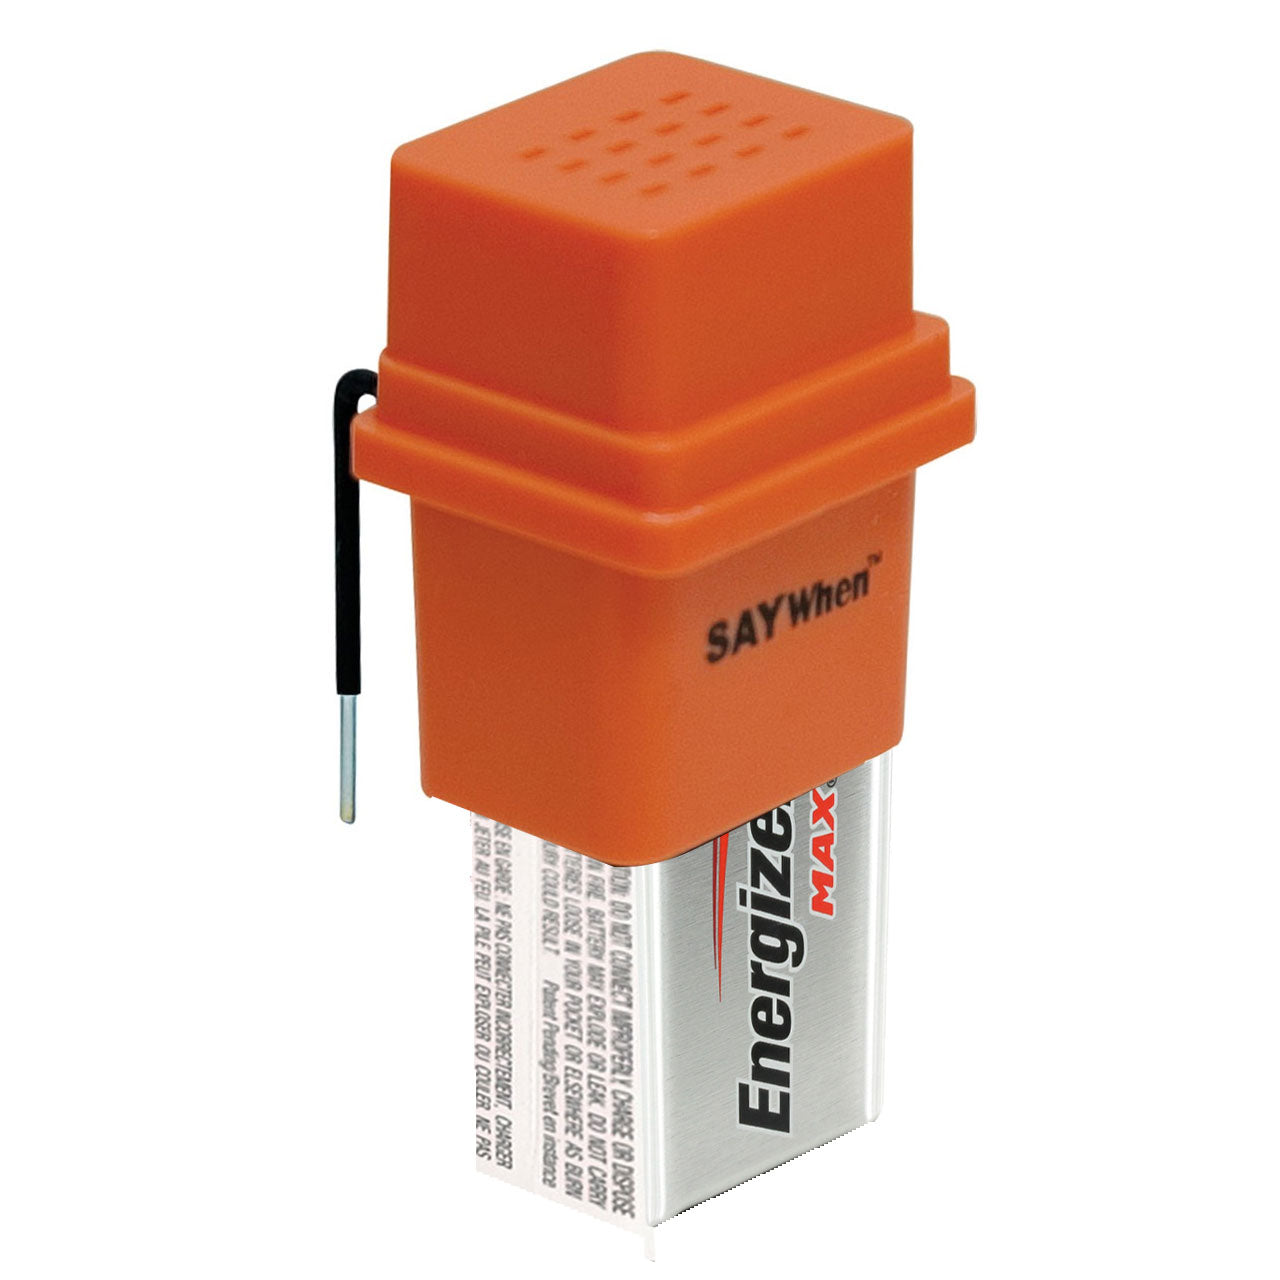 An orange rectangular device with a 9 Volt battery in it and 2 prongs on the back used for detecting liquid levels